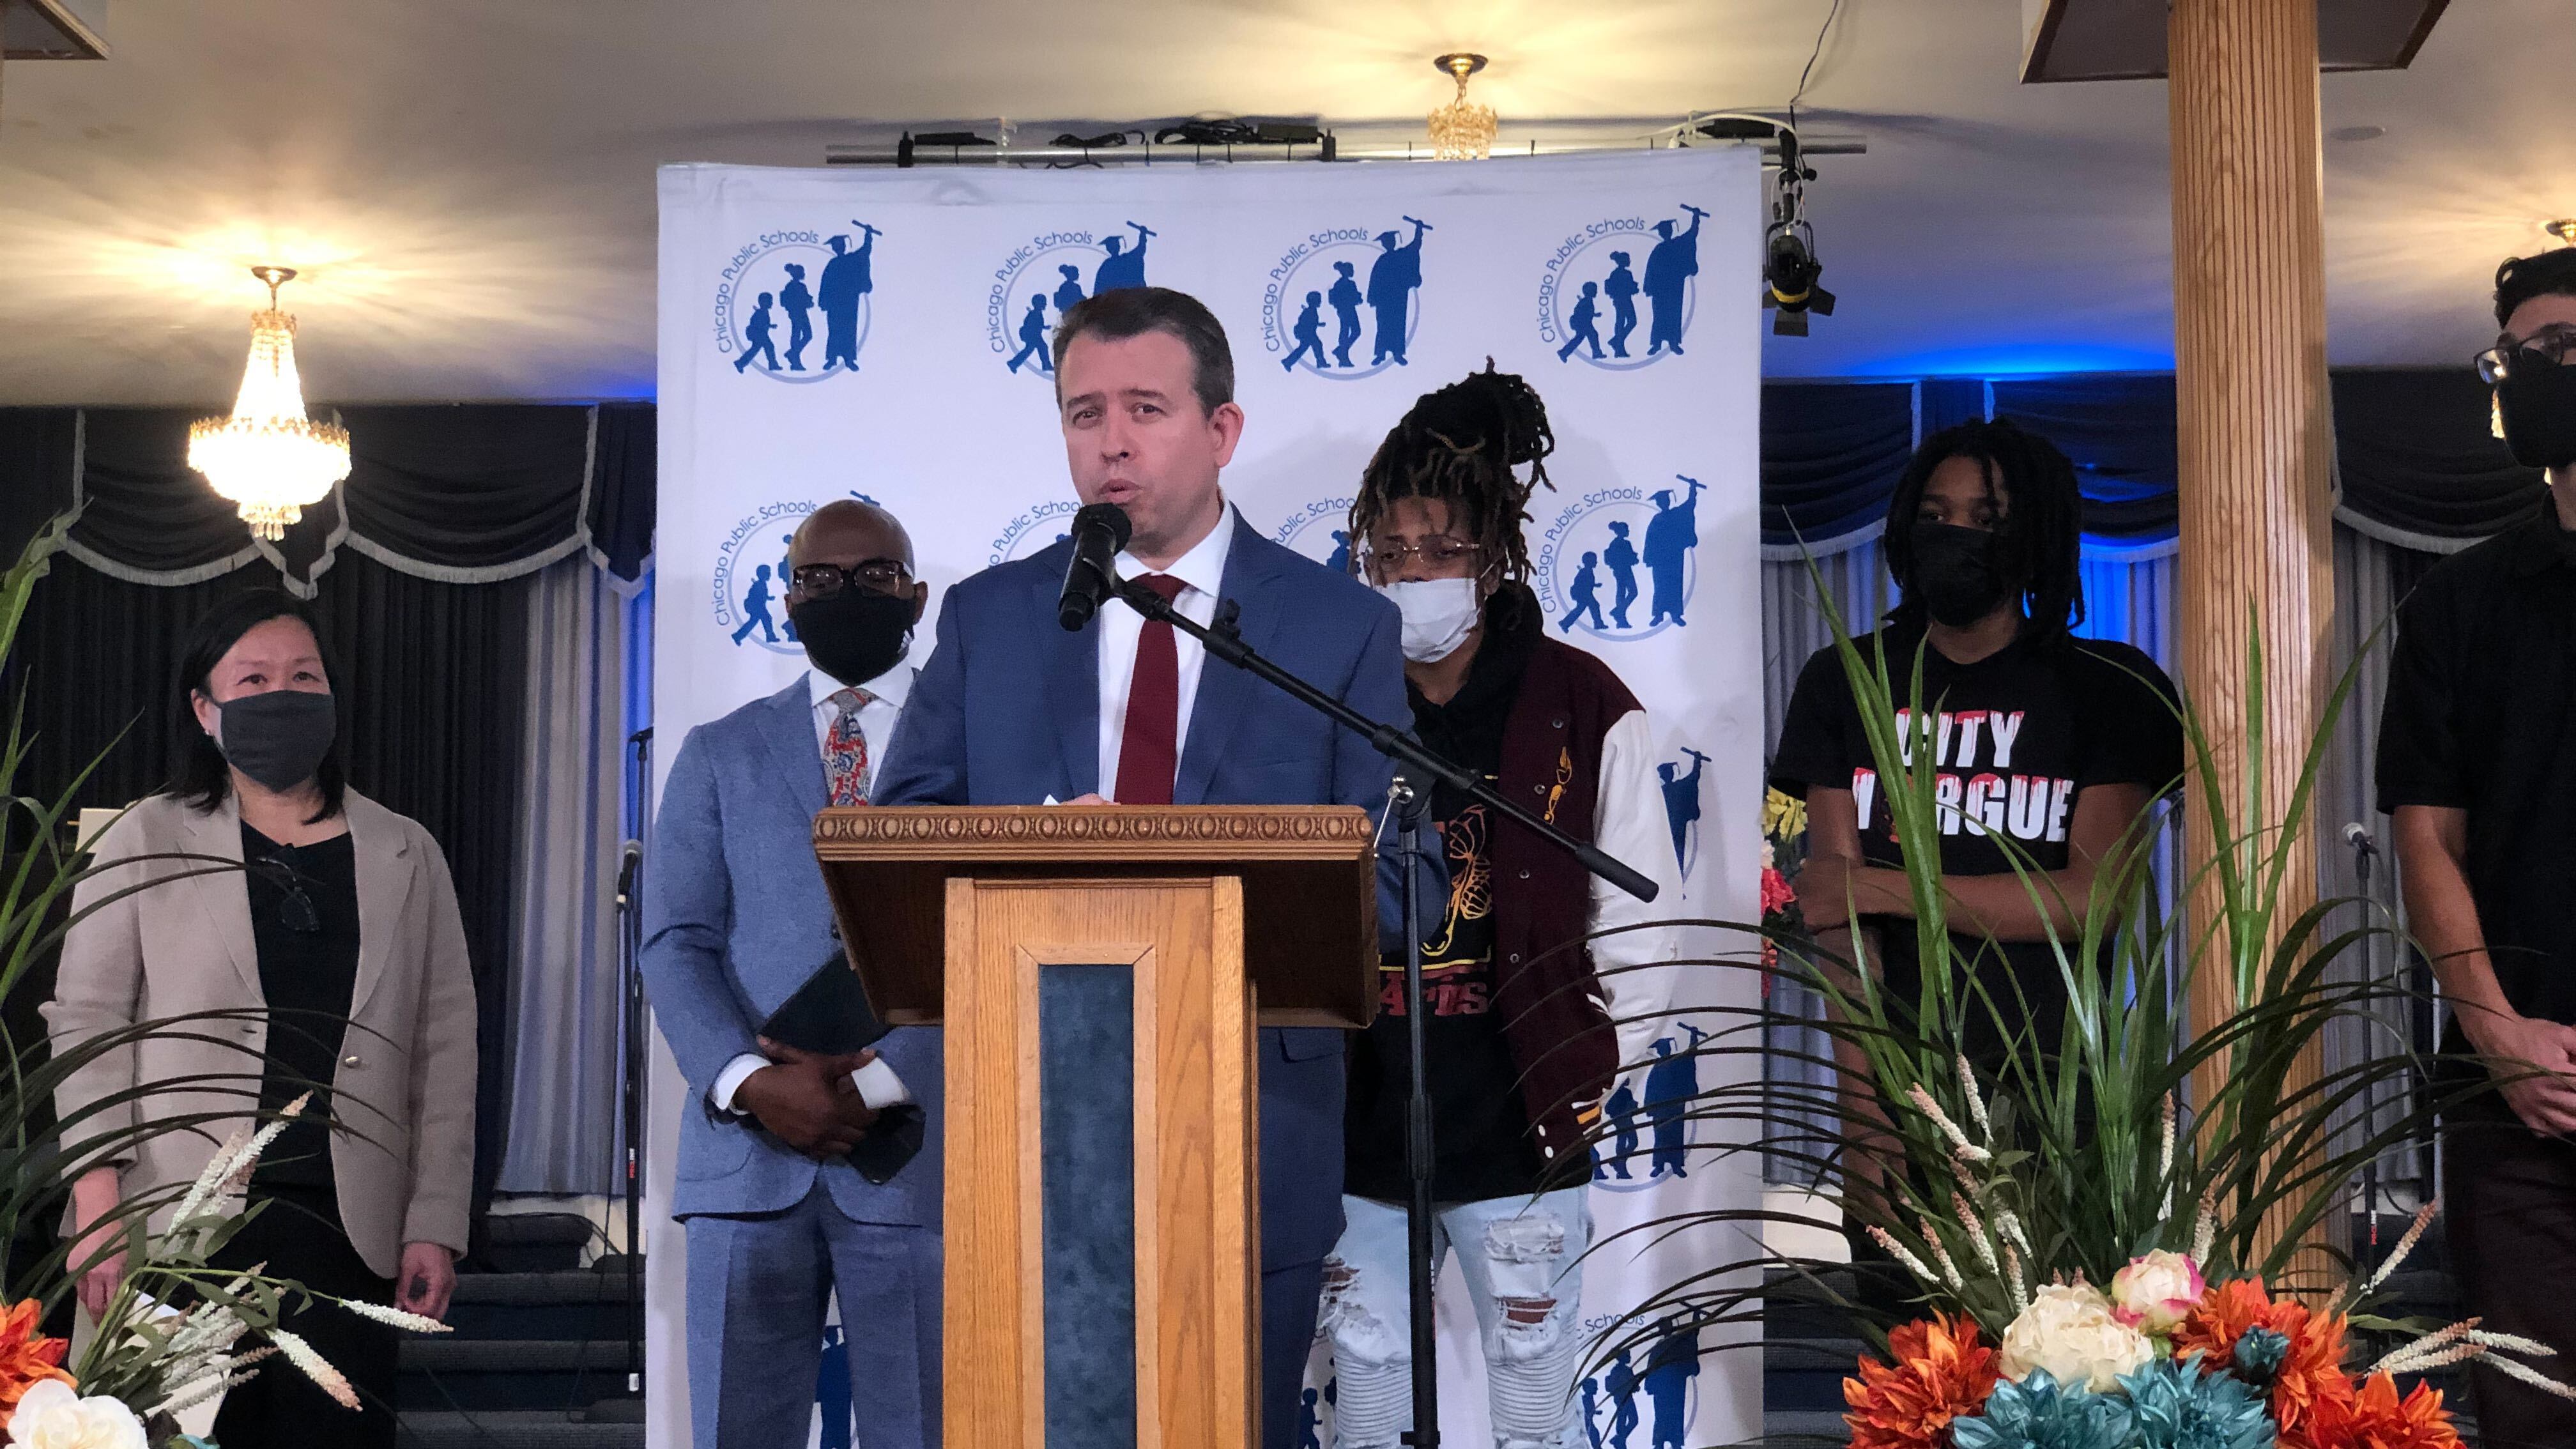 Flanked by district officials and local students, Chicago Public Schools CEO Pedro Martinez stands at a podium in a suit and tie and announces an expansion of a youth violence intervention program Choose for Change.